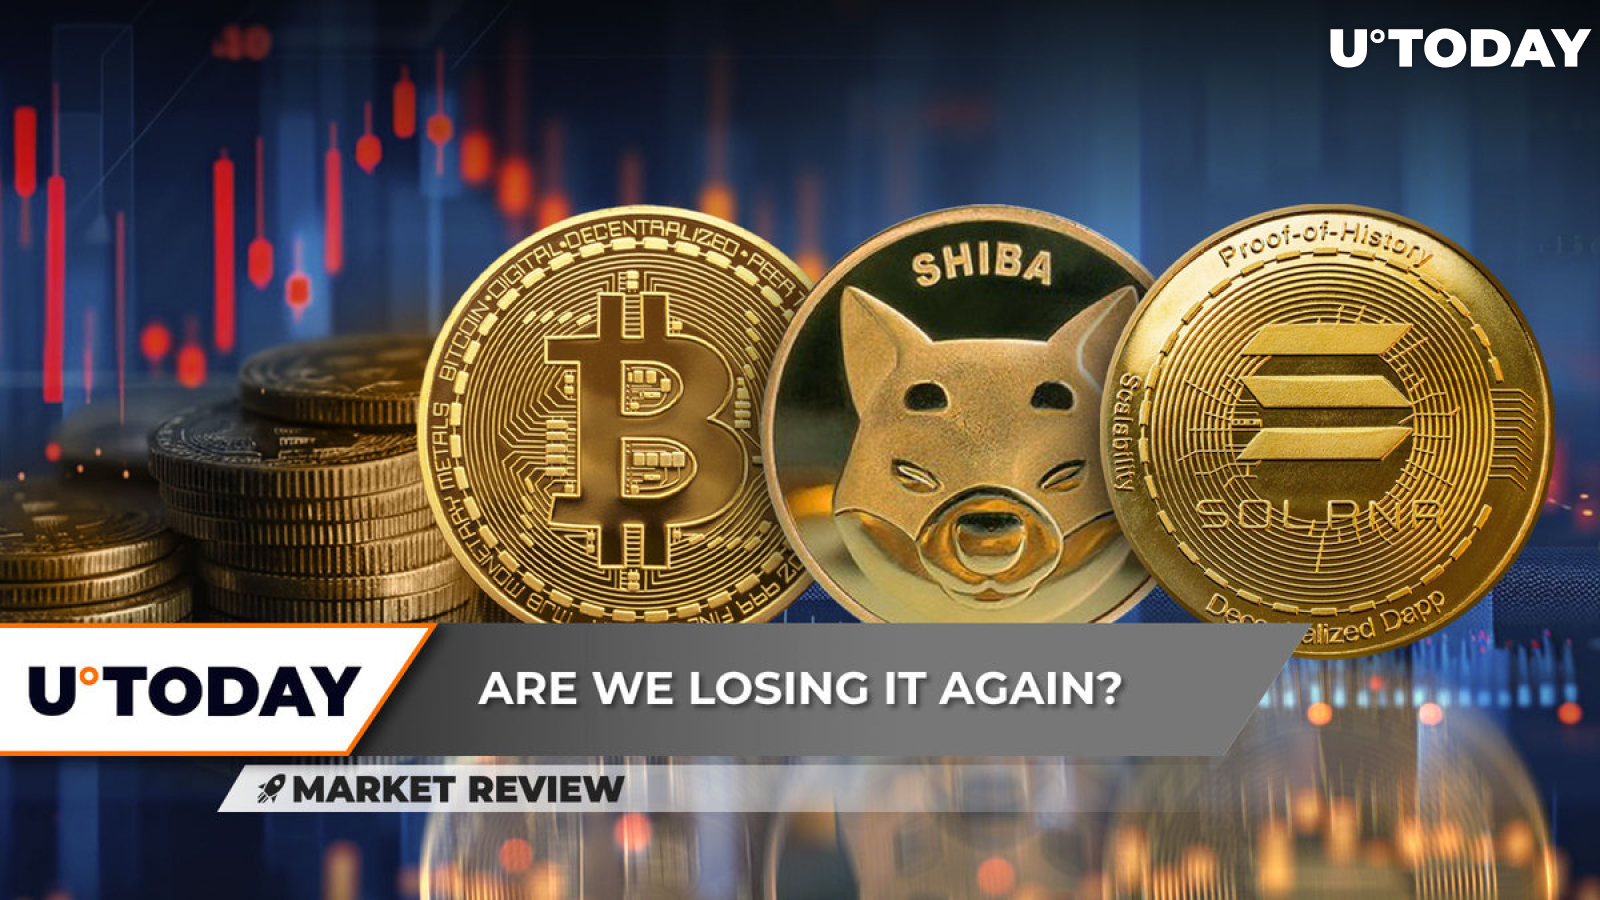 Bitcoin (BTC) on Verge of Losing $60,000, Is Shiba Inu (SHIB) Ready for It? Solana (SOL) Forms Reversal Pattern